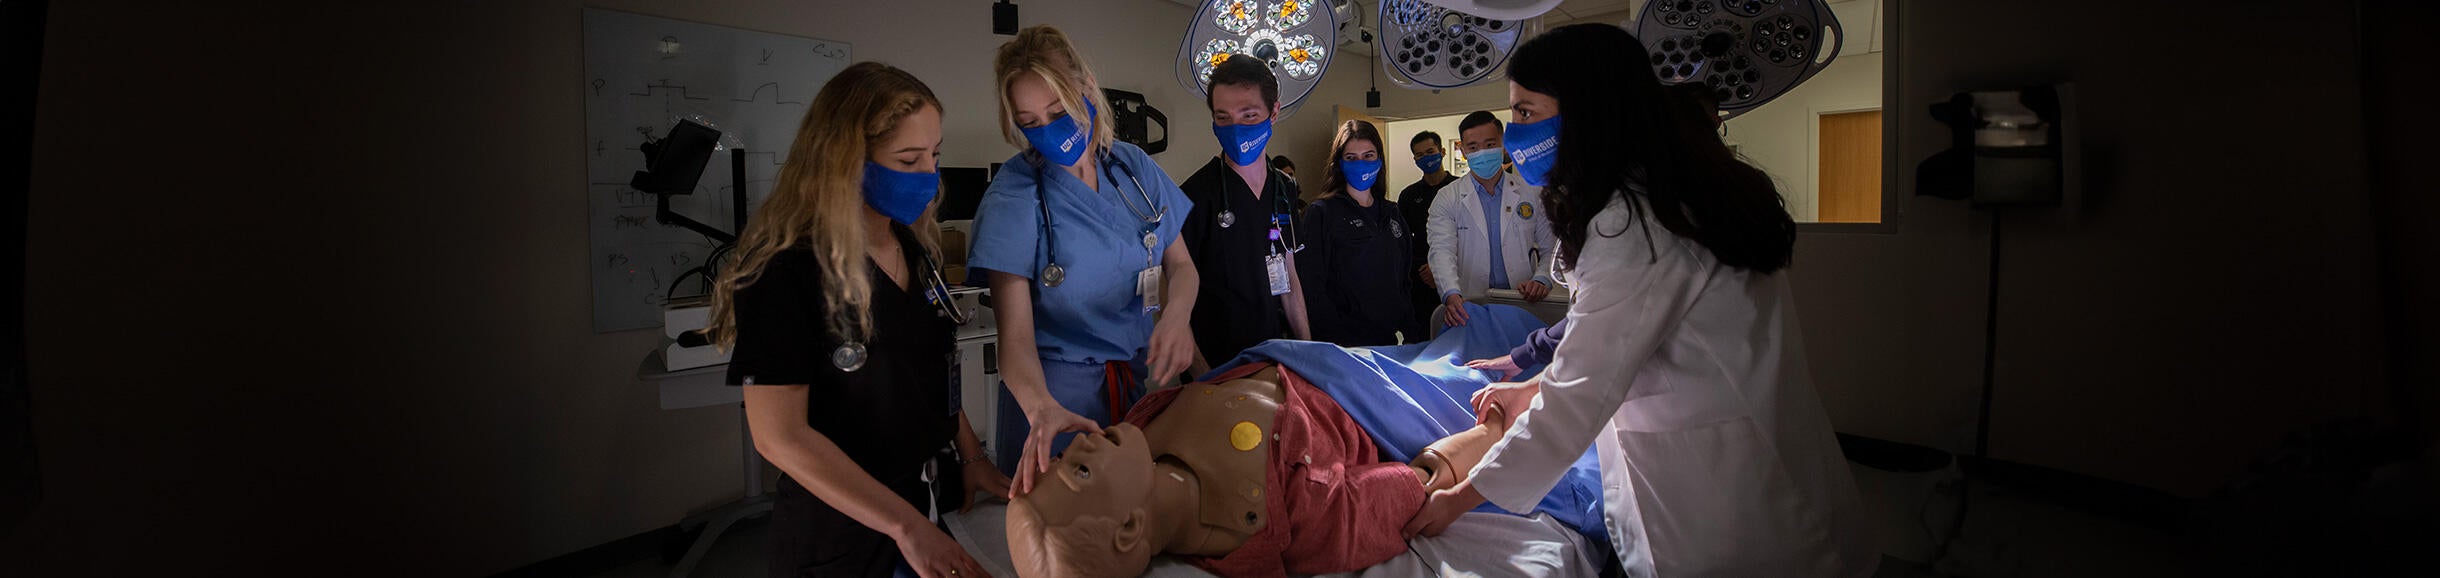 School of Medicine Clinical Skills and Simulation Suite